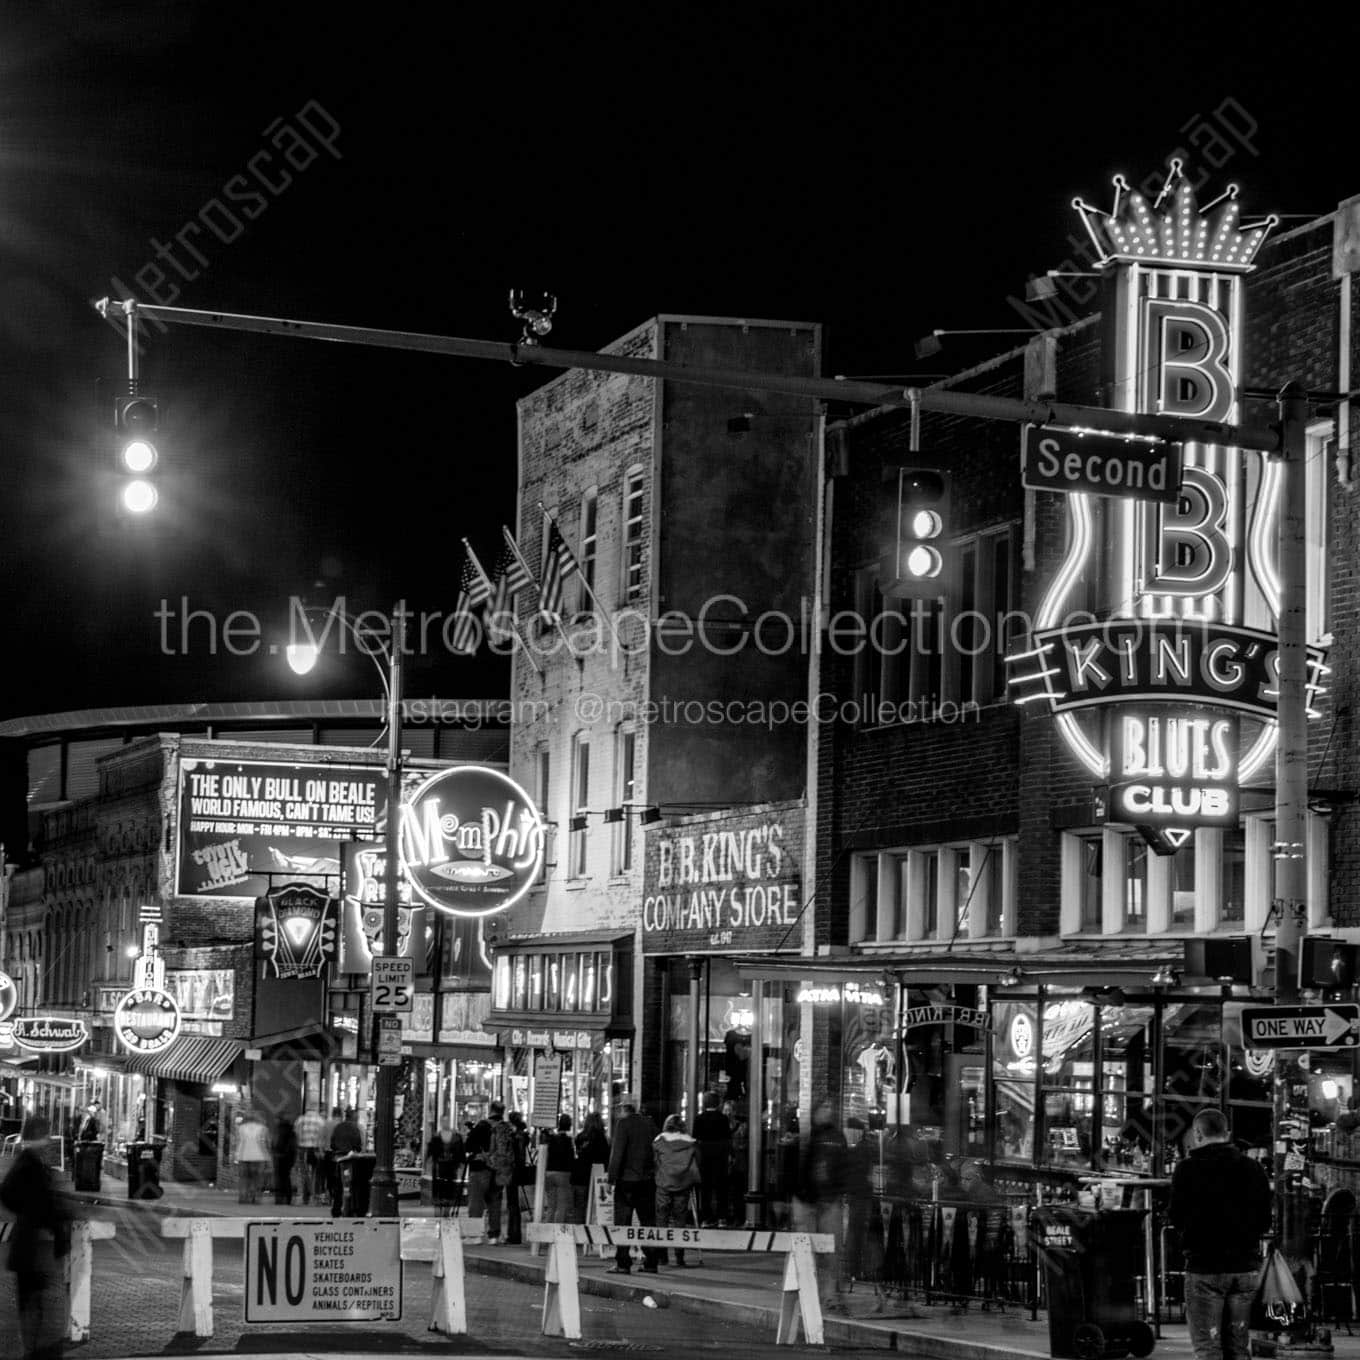 second and beale street at night Black & White Office Art